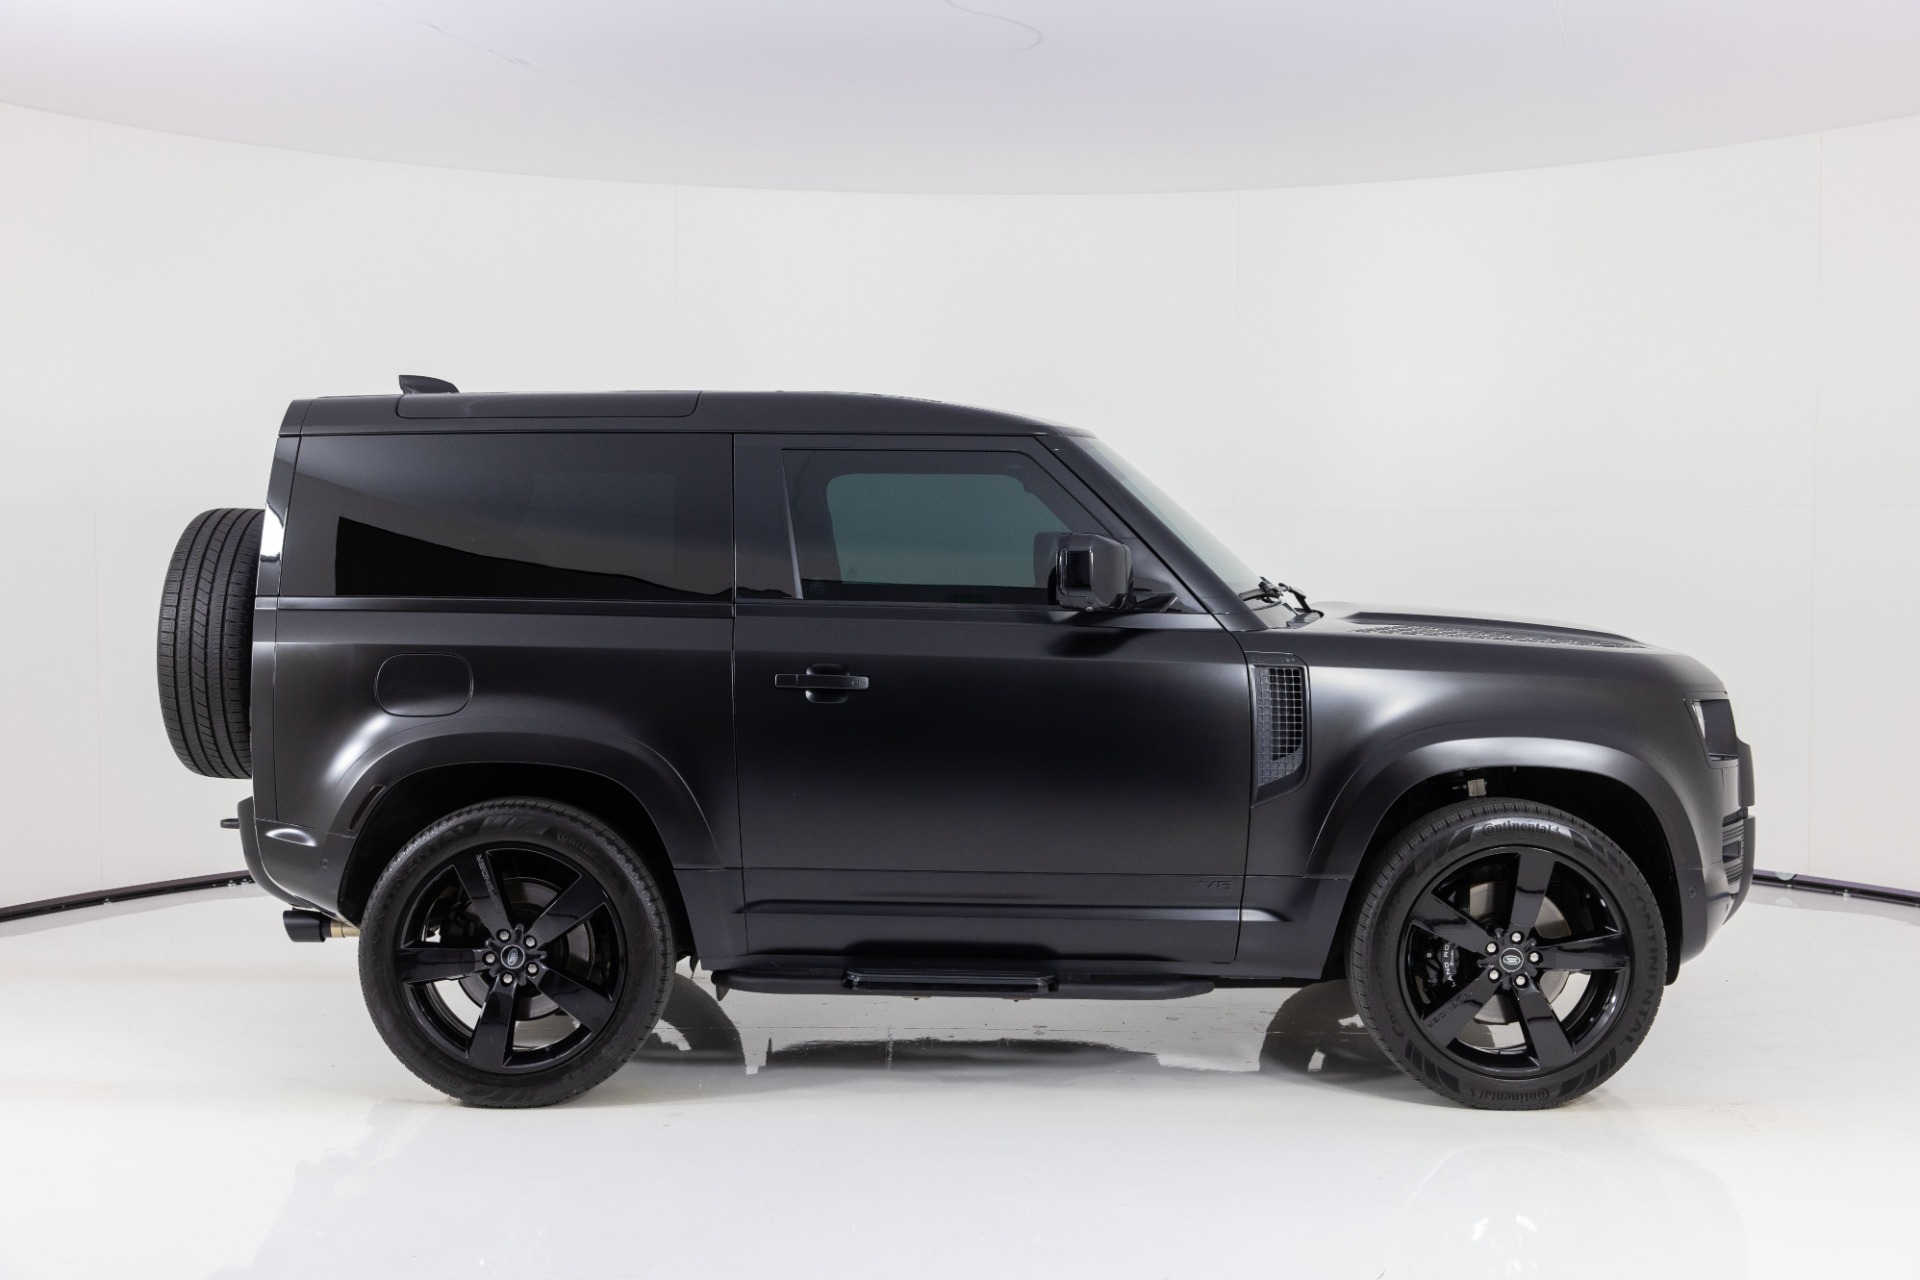 Black Land Rover Defender 110X XPEL Stealth Matte PPF Install